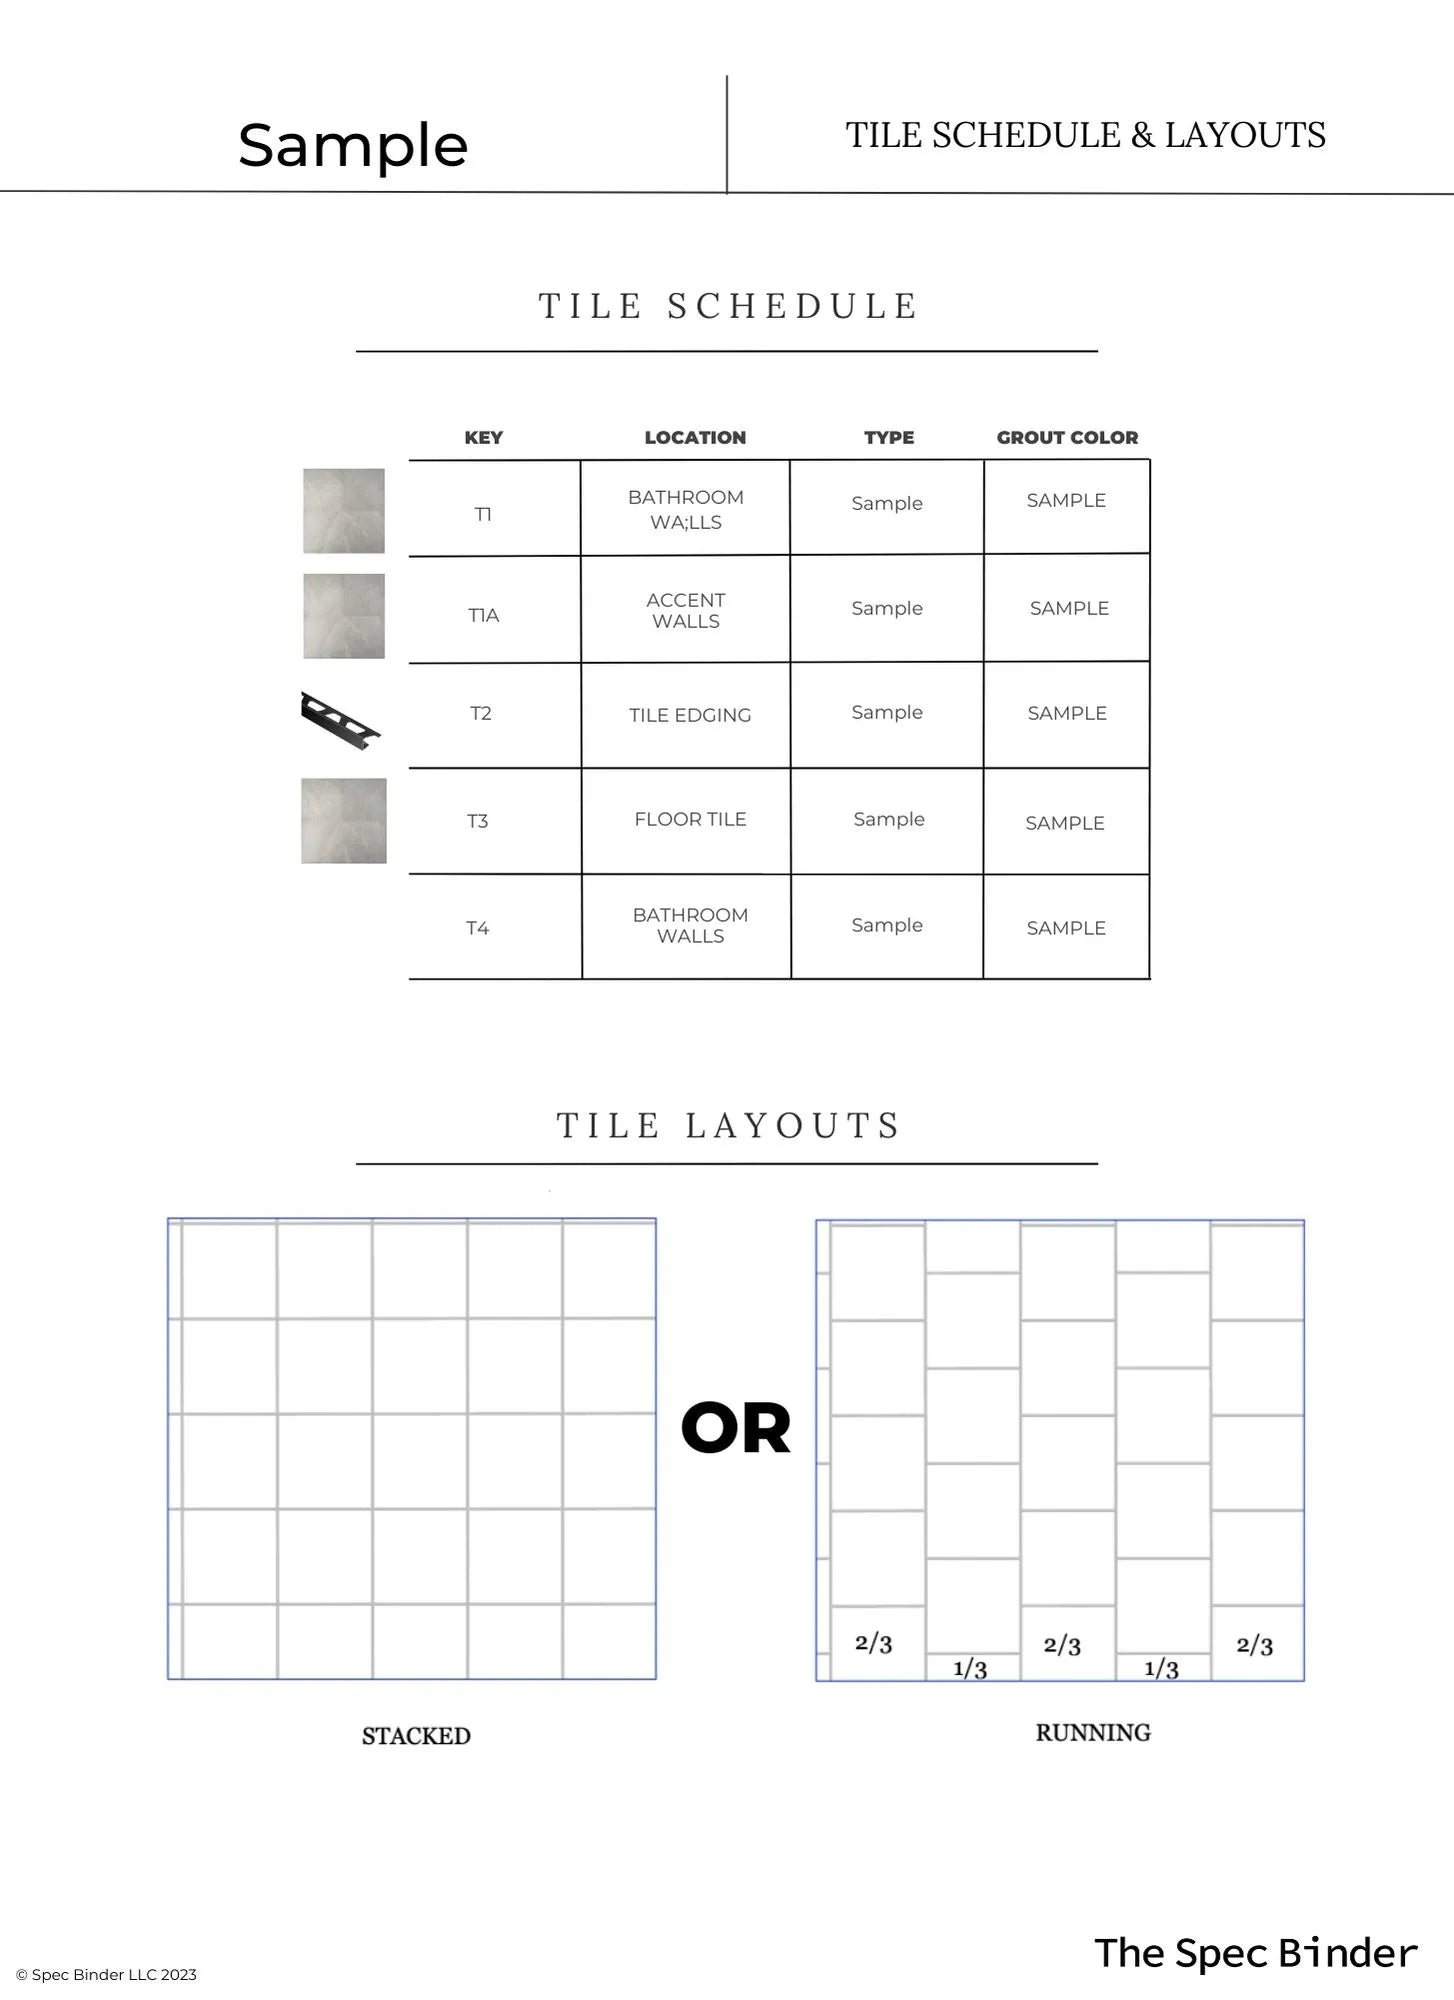 Sample tile schedule showing tile layout and placement for each interior room design